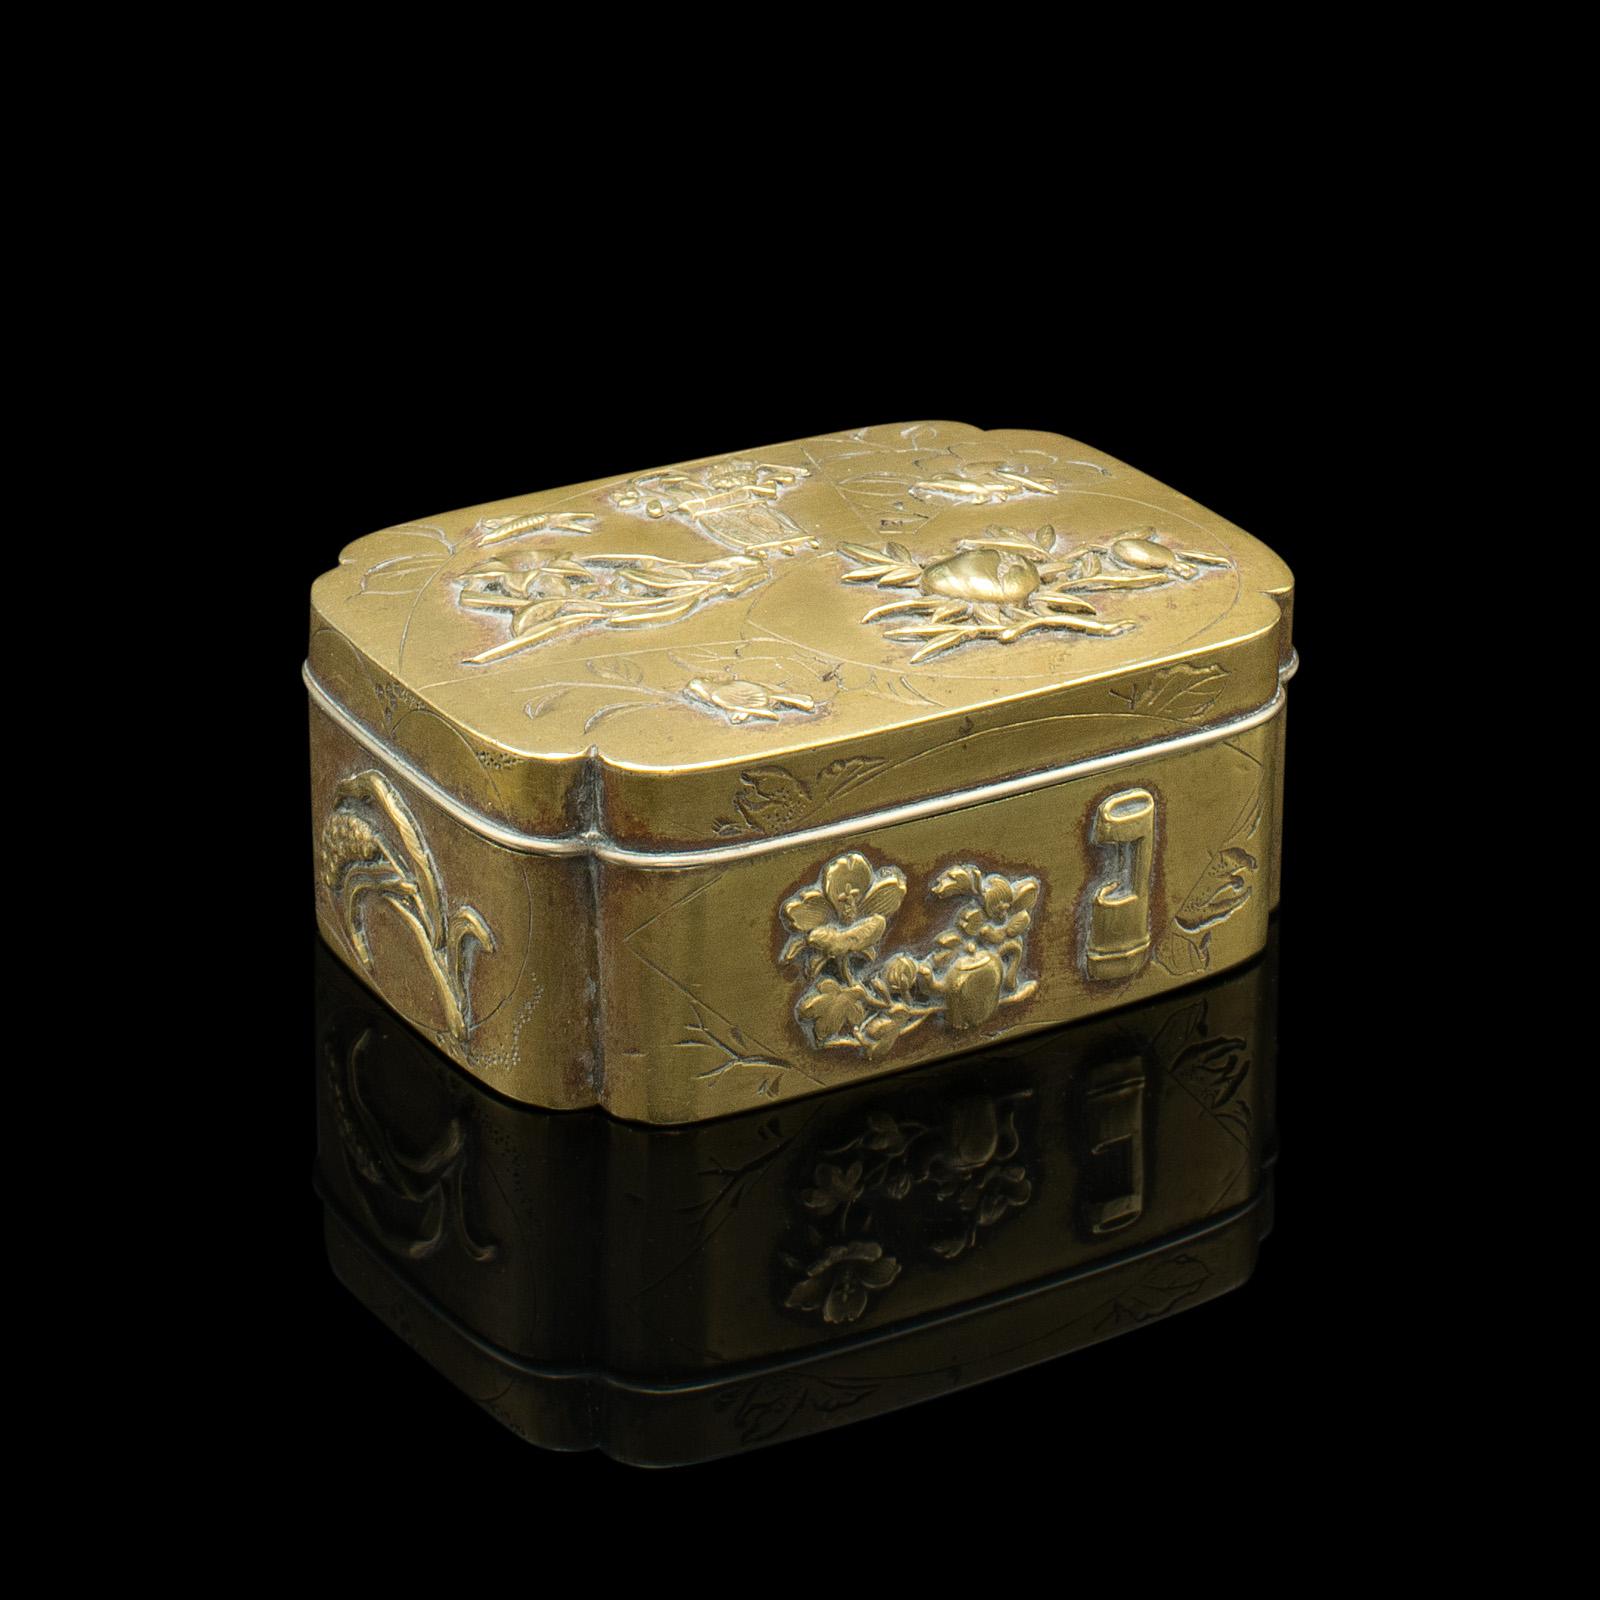 This is a small antique seamstress' button box. A Japanese, brass decorative tin, dating to the early Victorian period, circa 1850.

Delicately crafted box with wonderful colour and detail
Displays a desirable aged patina throughout with minimal